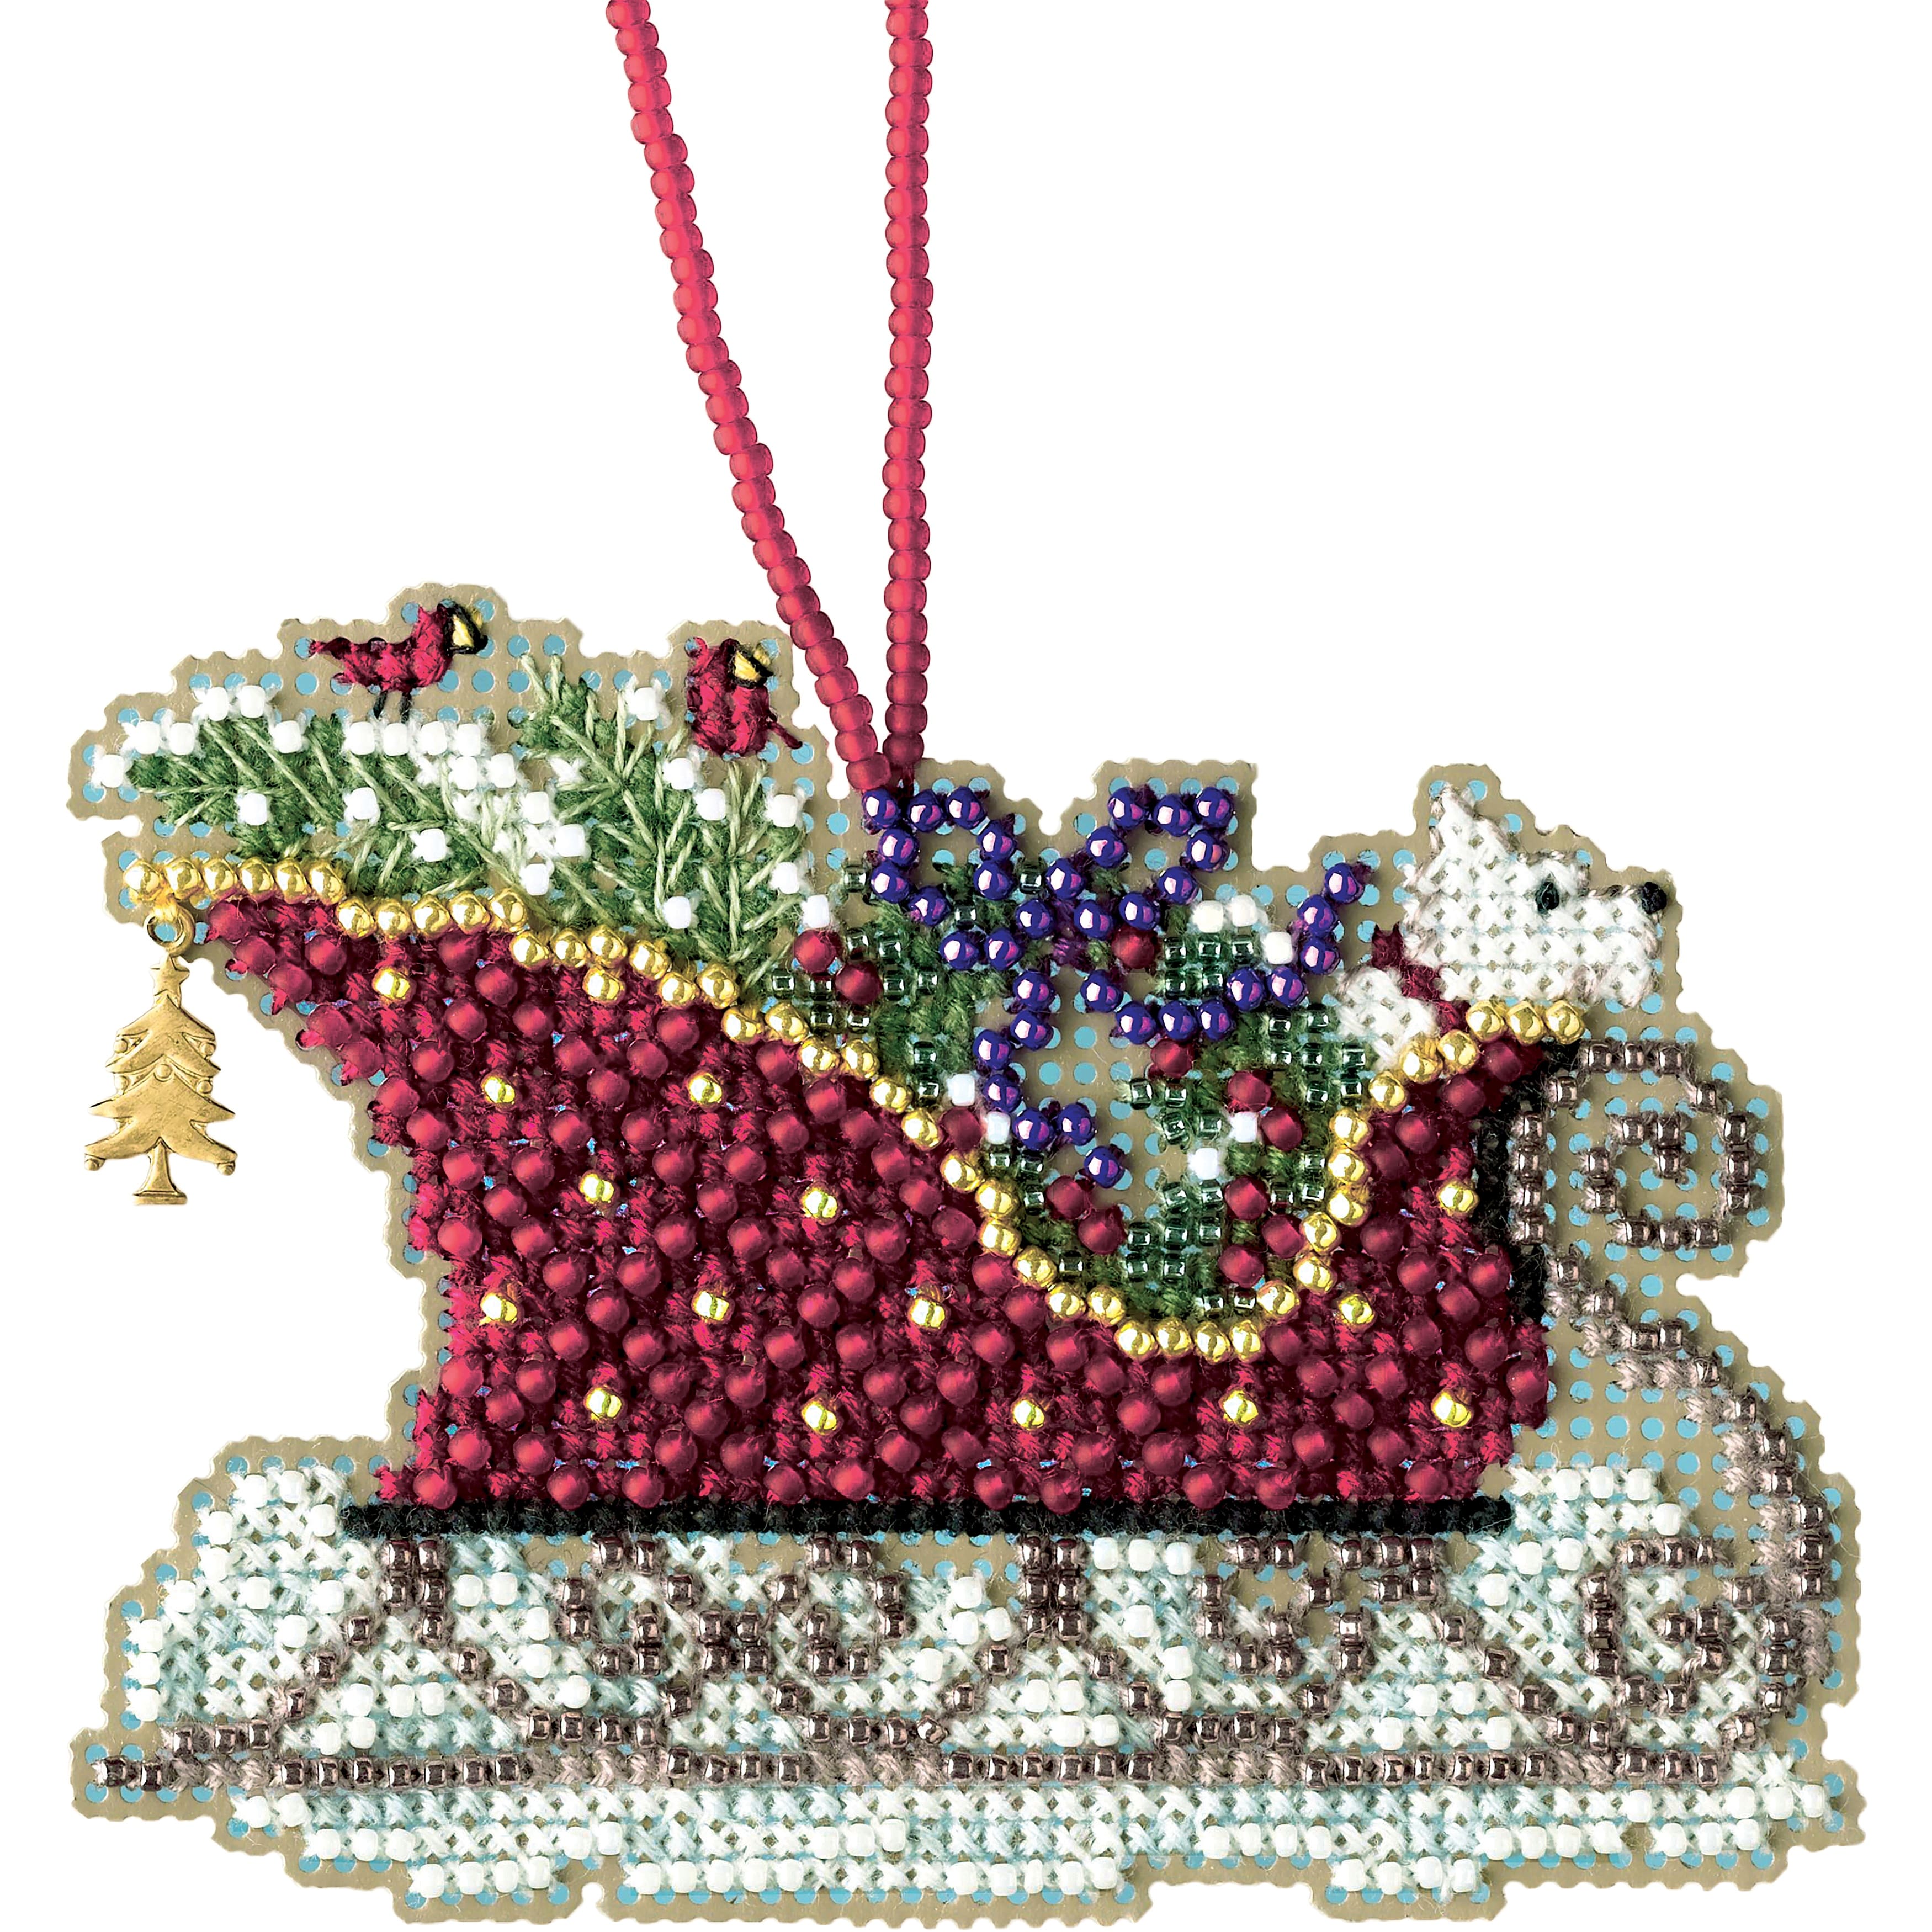 Mill Hill&#xAE; Sleigh Ride Evergreen Sleigh Ornament Counted Cross Stitch Kit